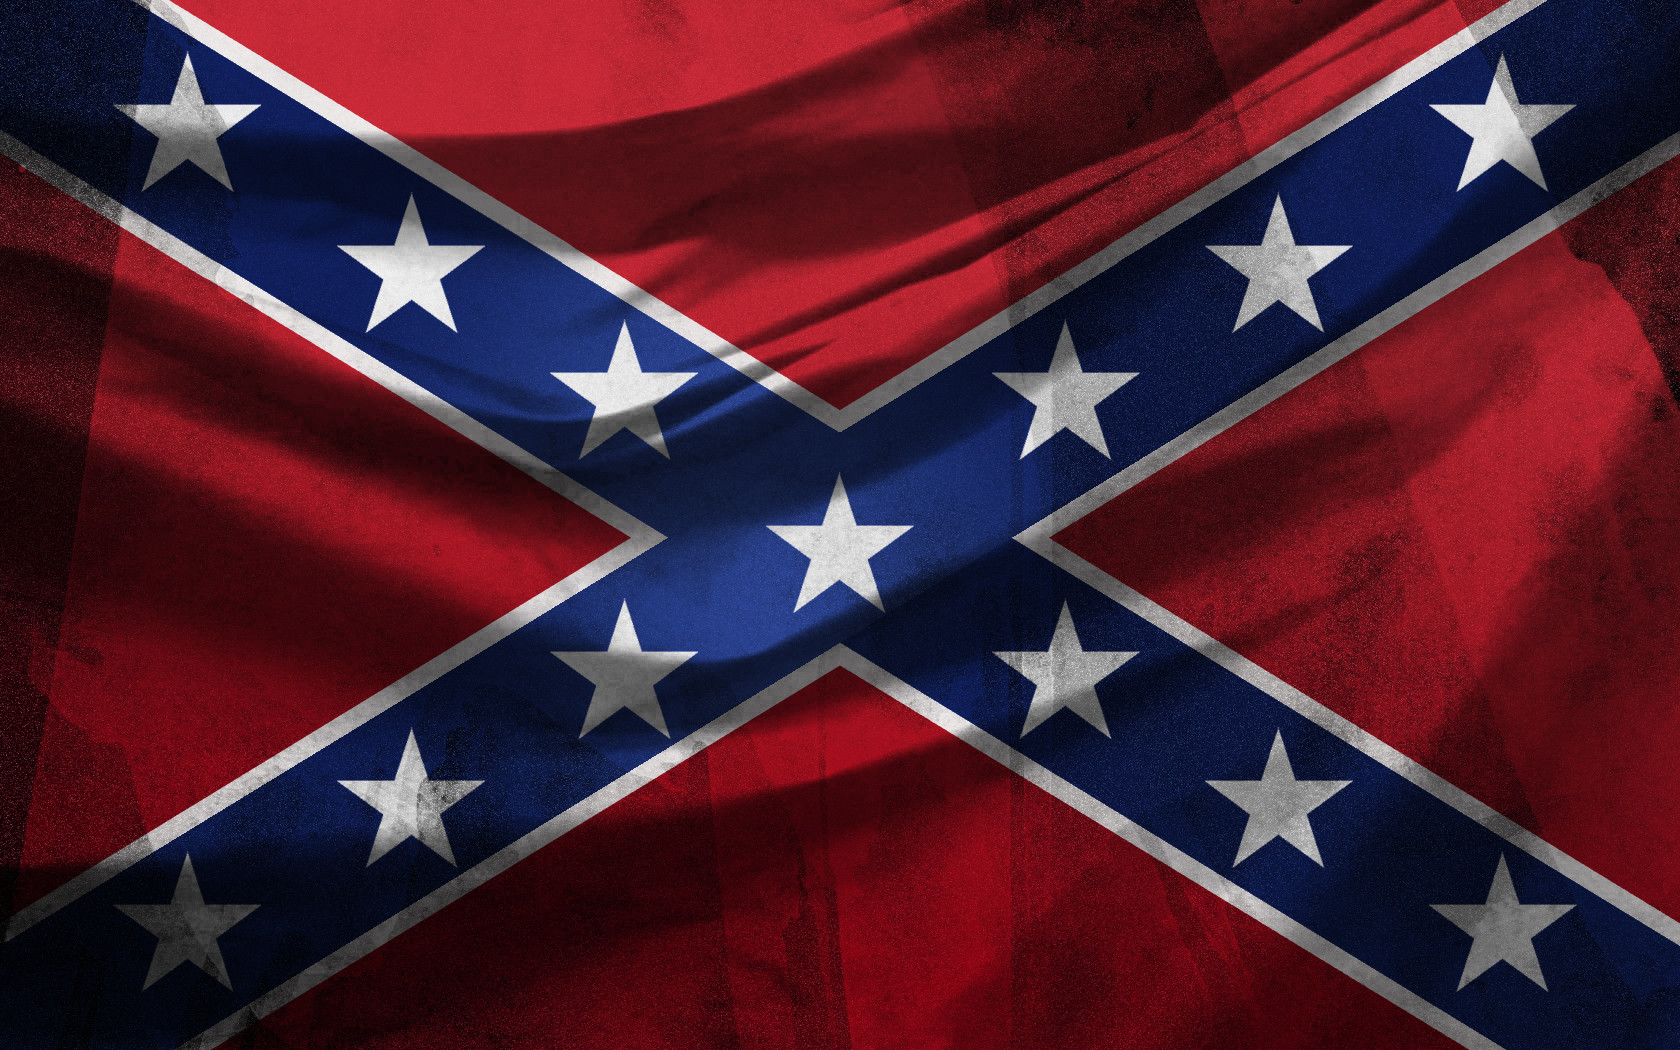 Modern display of the Confederate flag